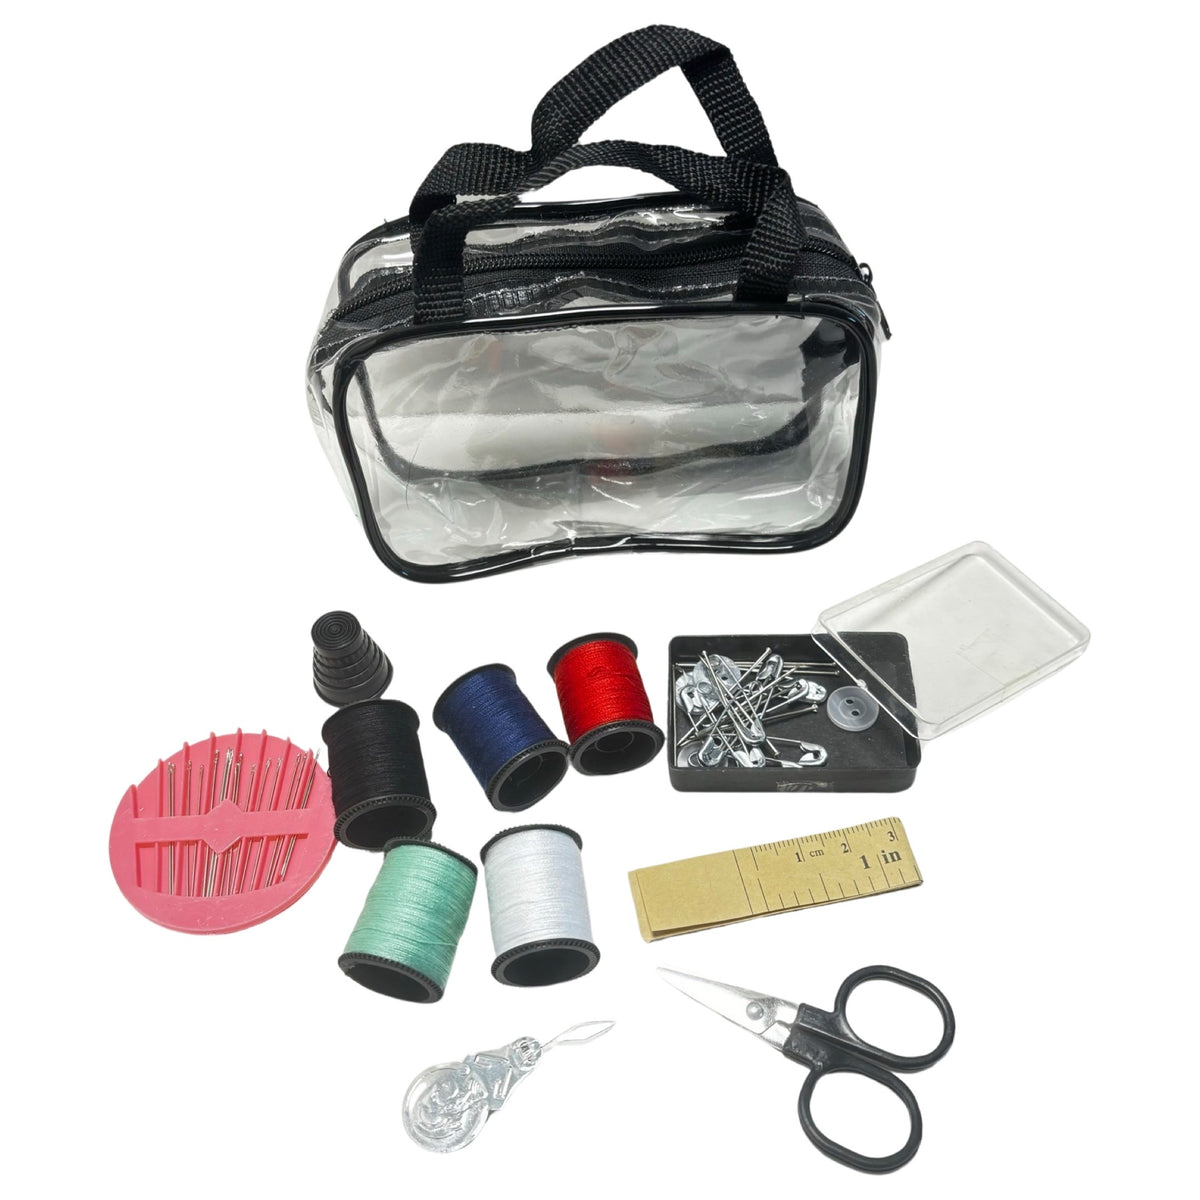 52pc Mini Travel Sewing Kit - Needles, Thread, Safety Pins and More